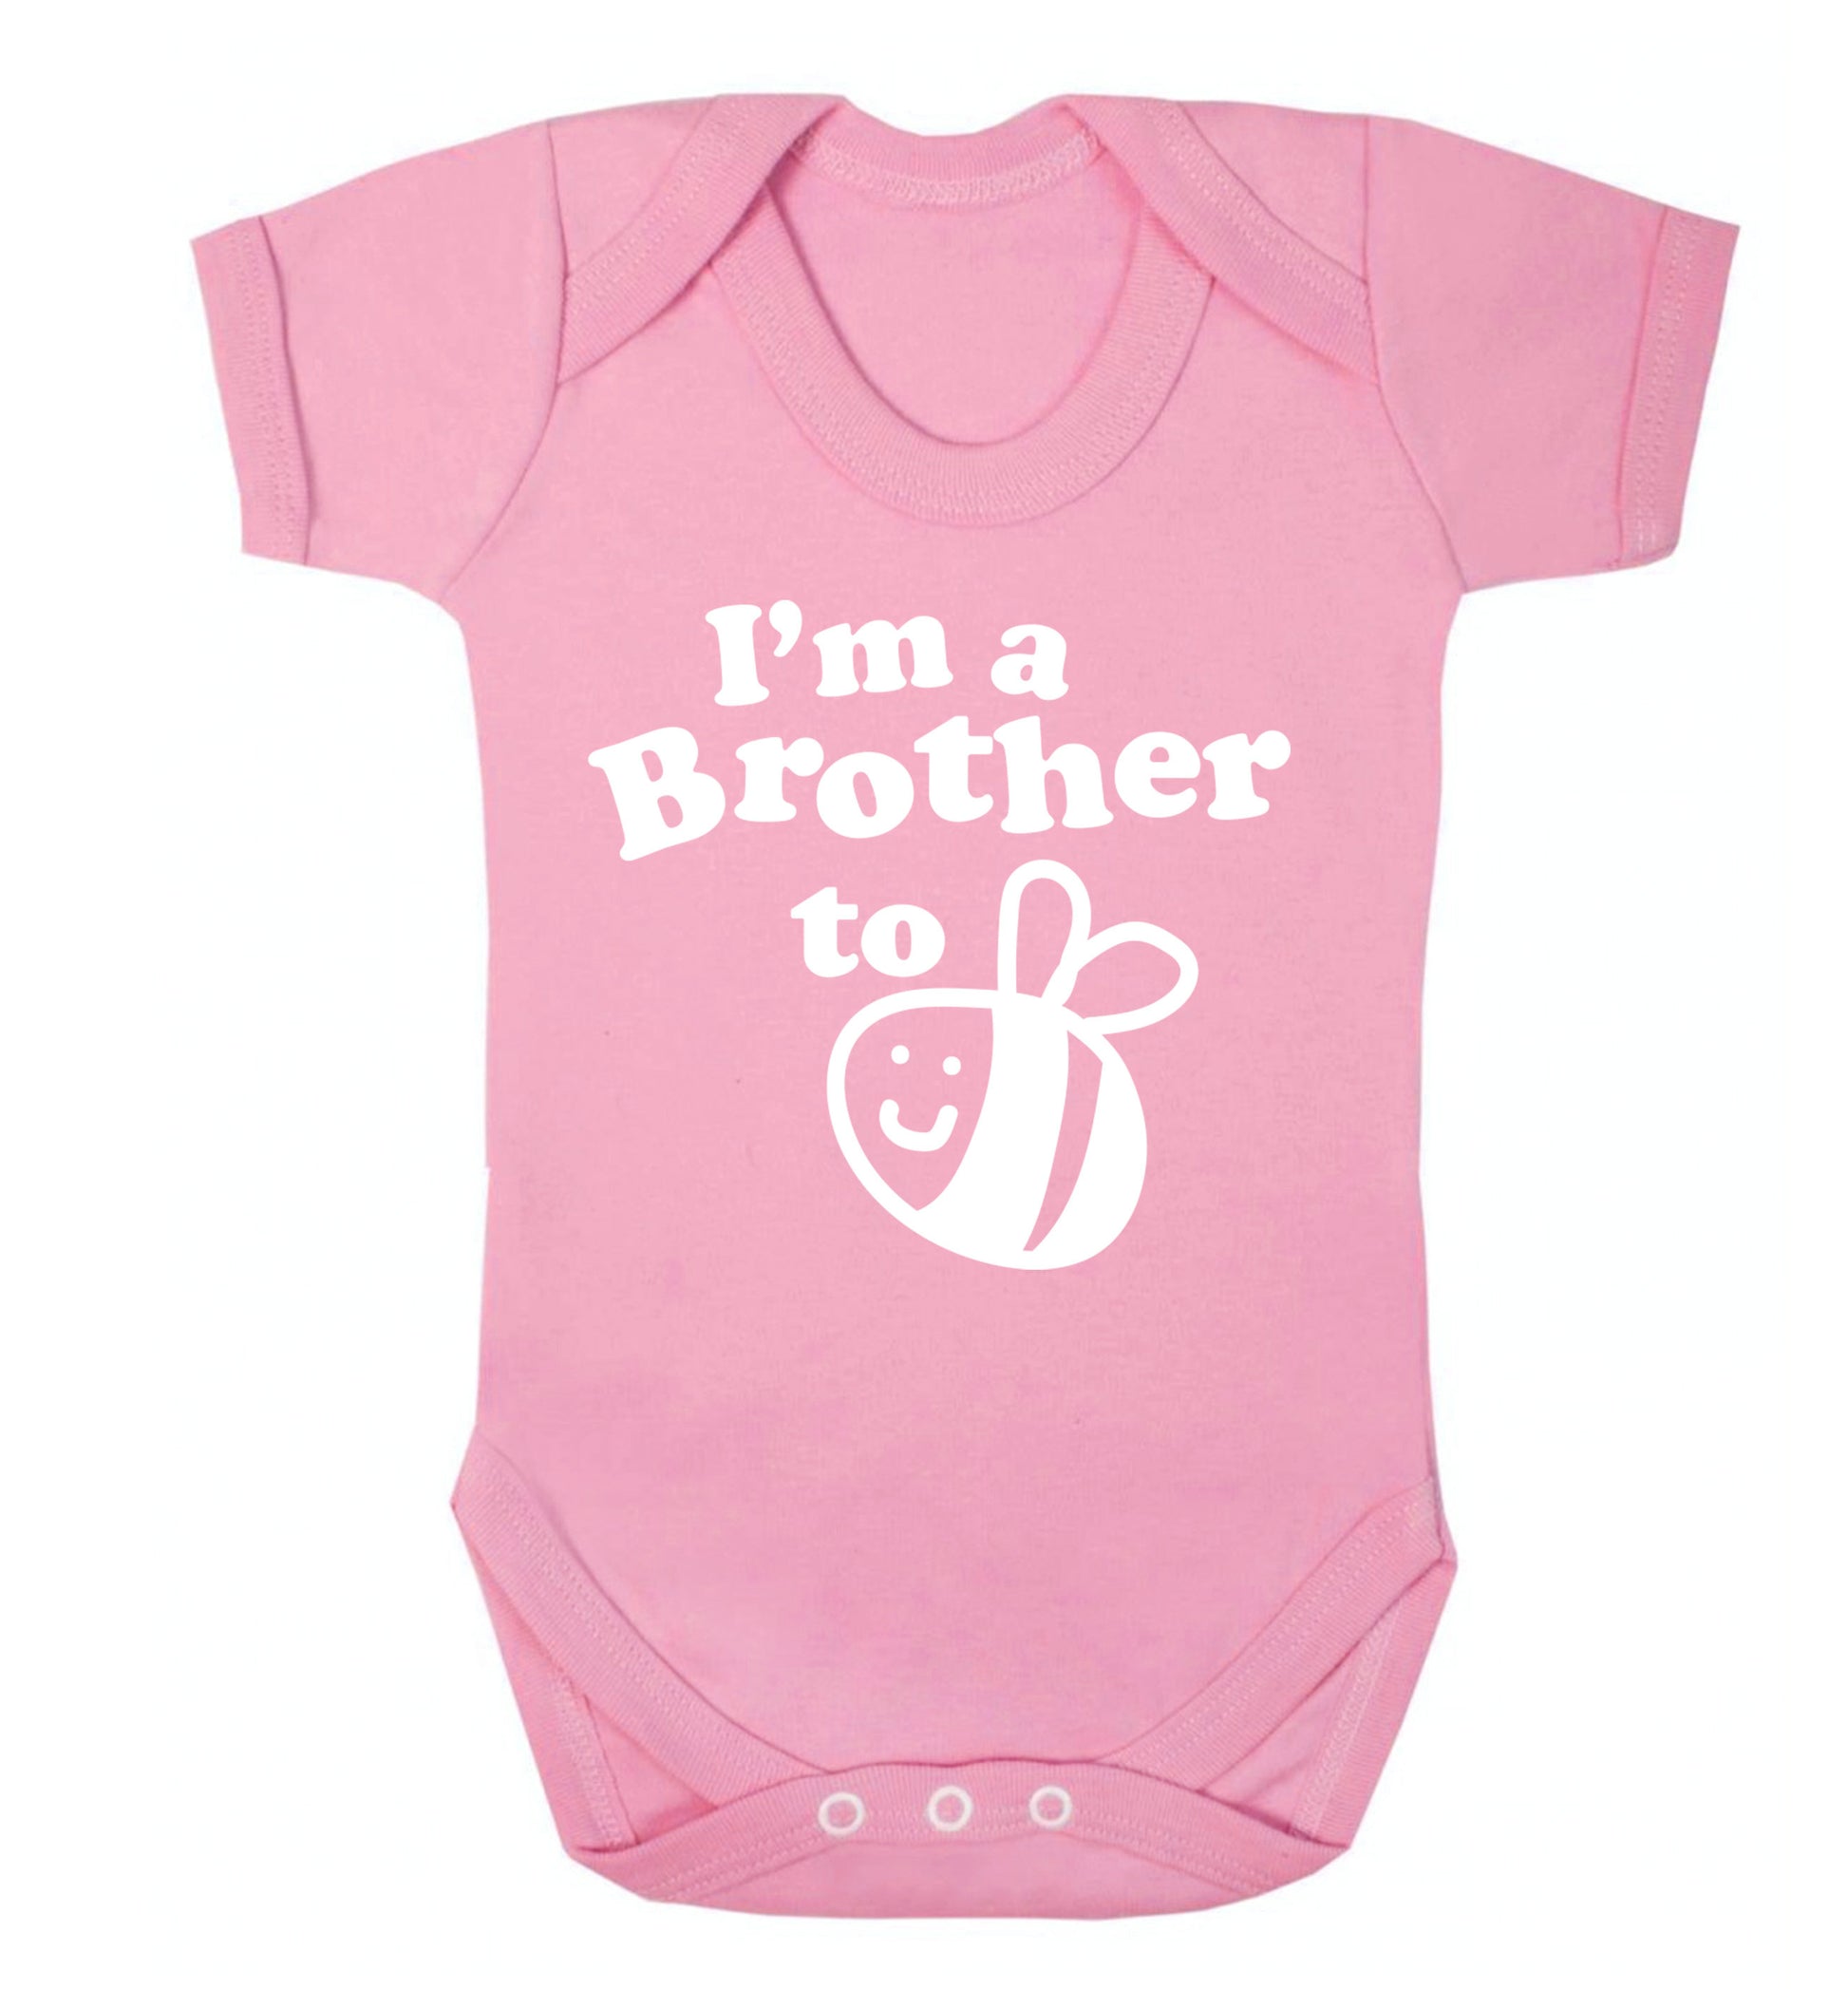 I'm a brother to be Baby Vest pale pink 18-24 months